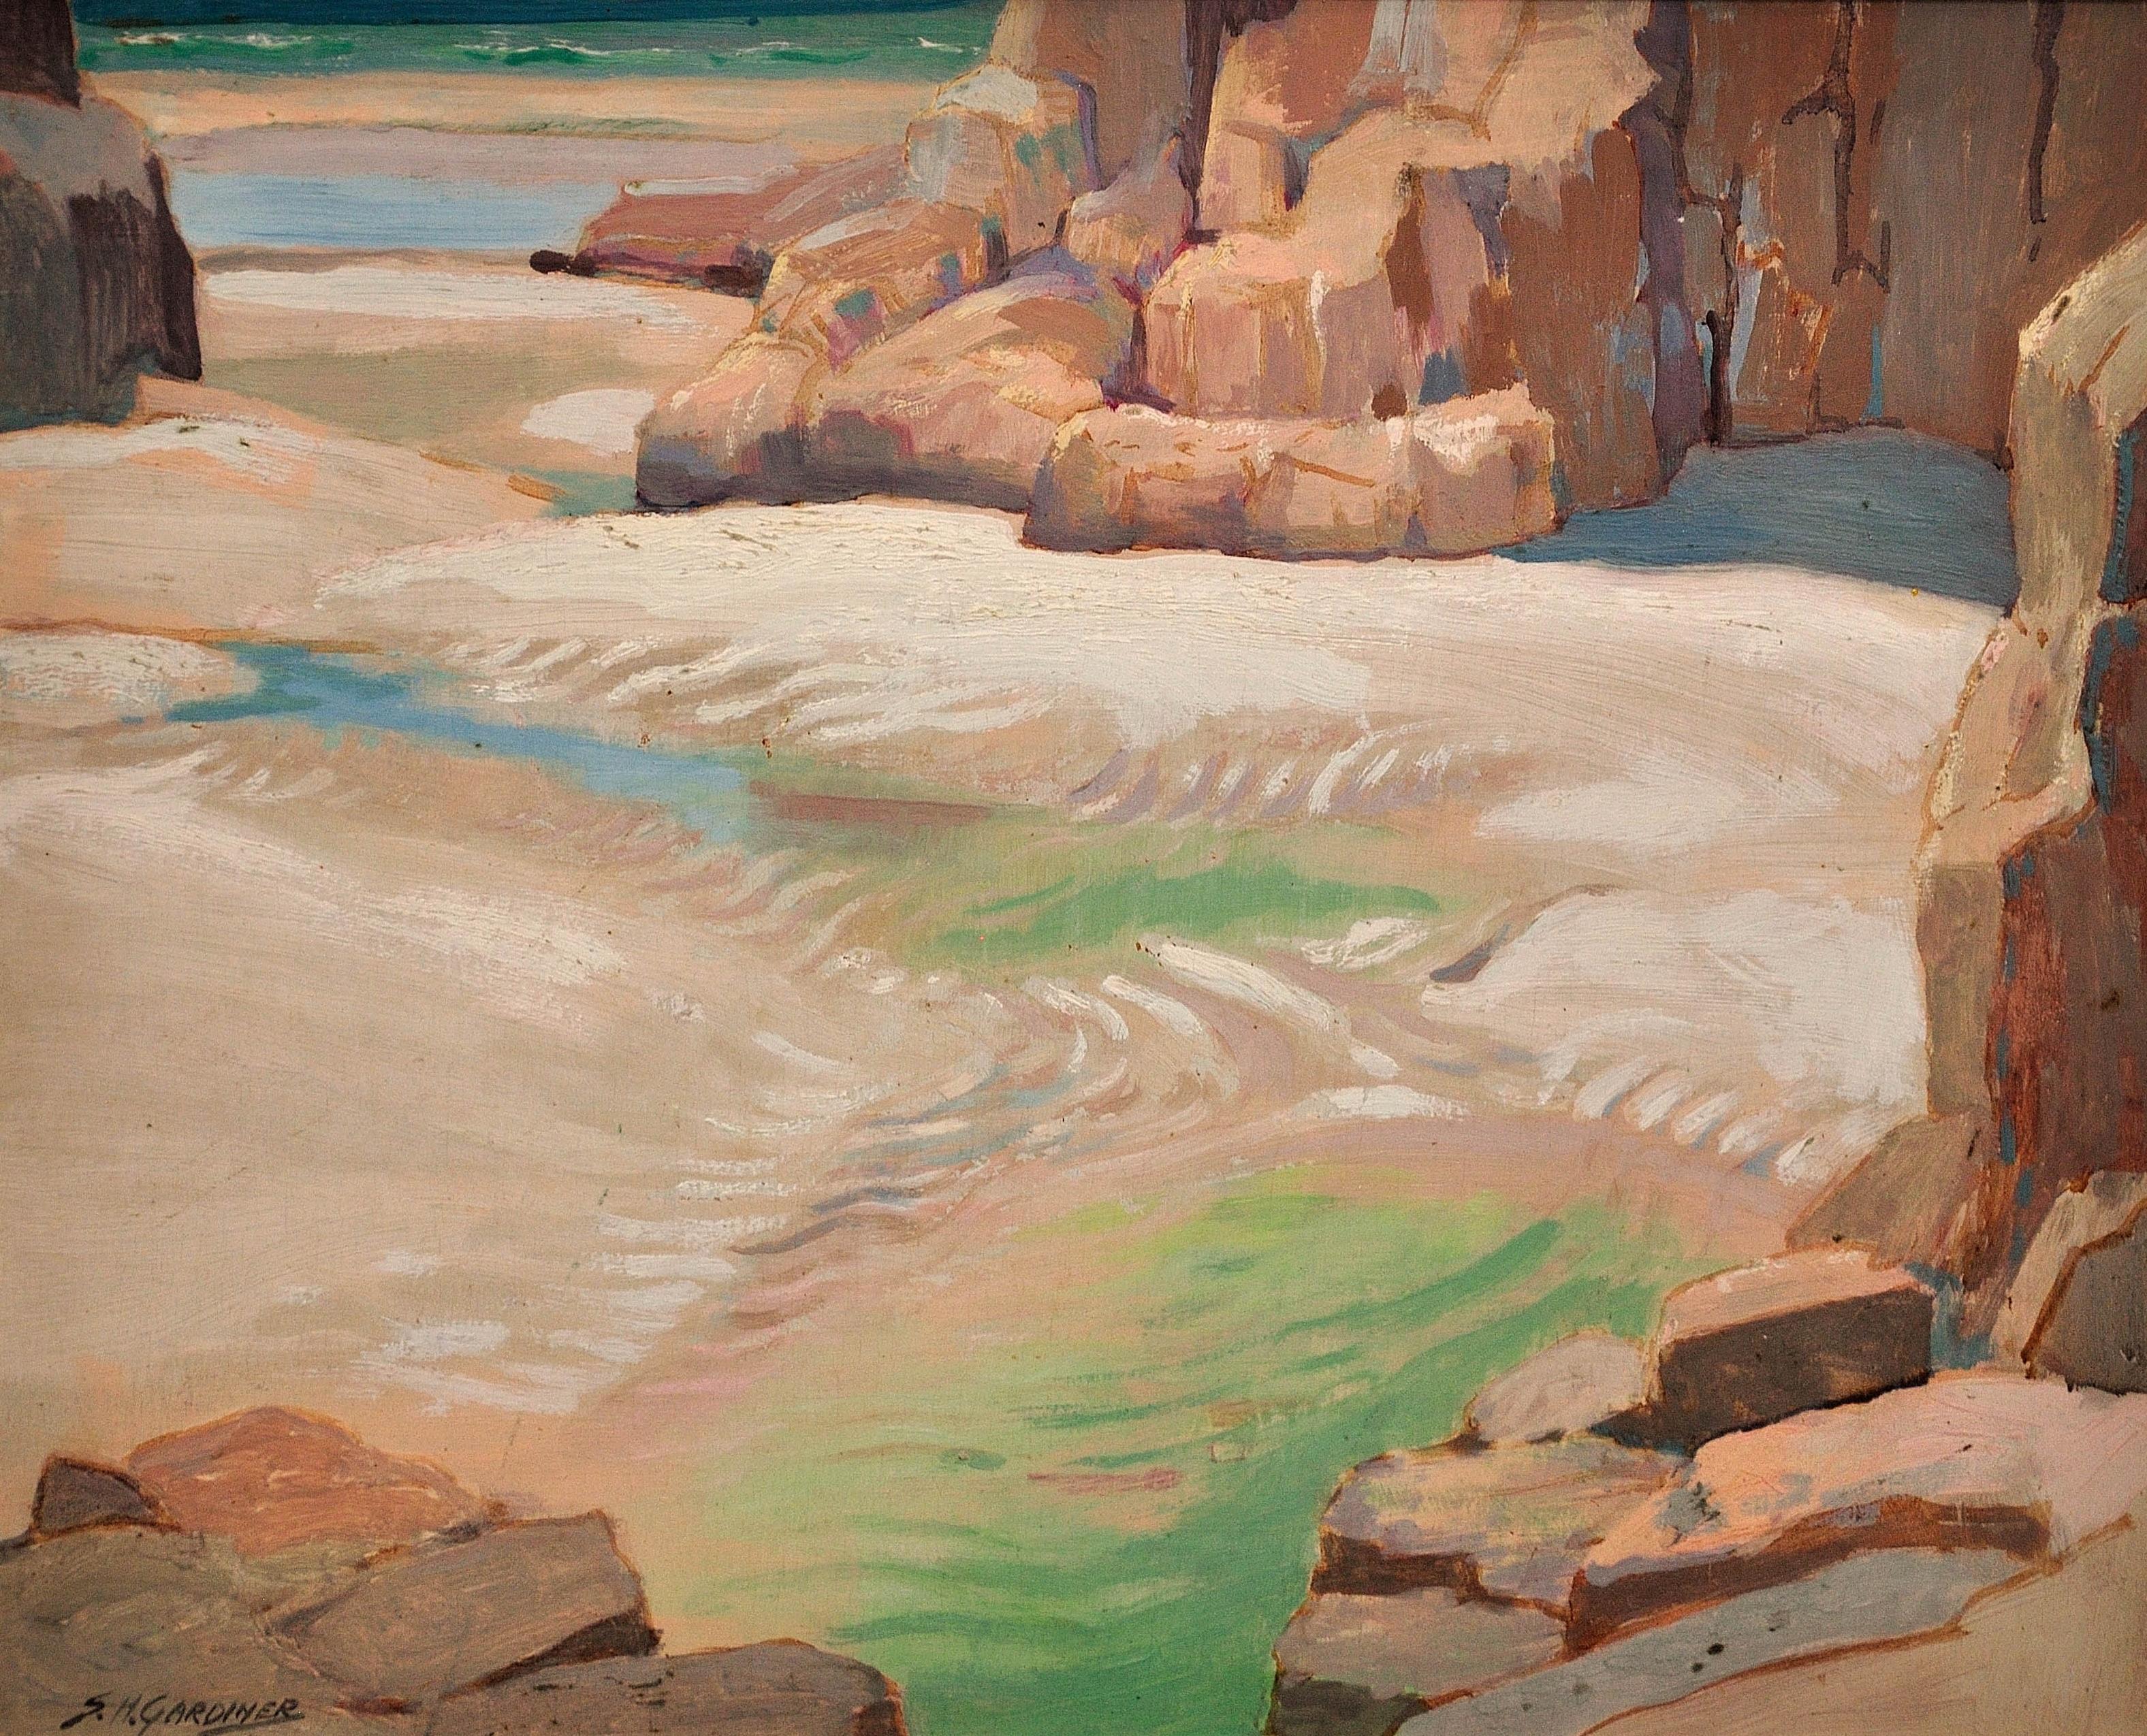 Tide Pools, Porthcurno Beach, Cornwall. Lamorna Valley Colony. Cornish Plein Air - Painting by Stanley Horace Gardiner